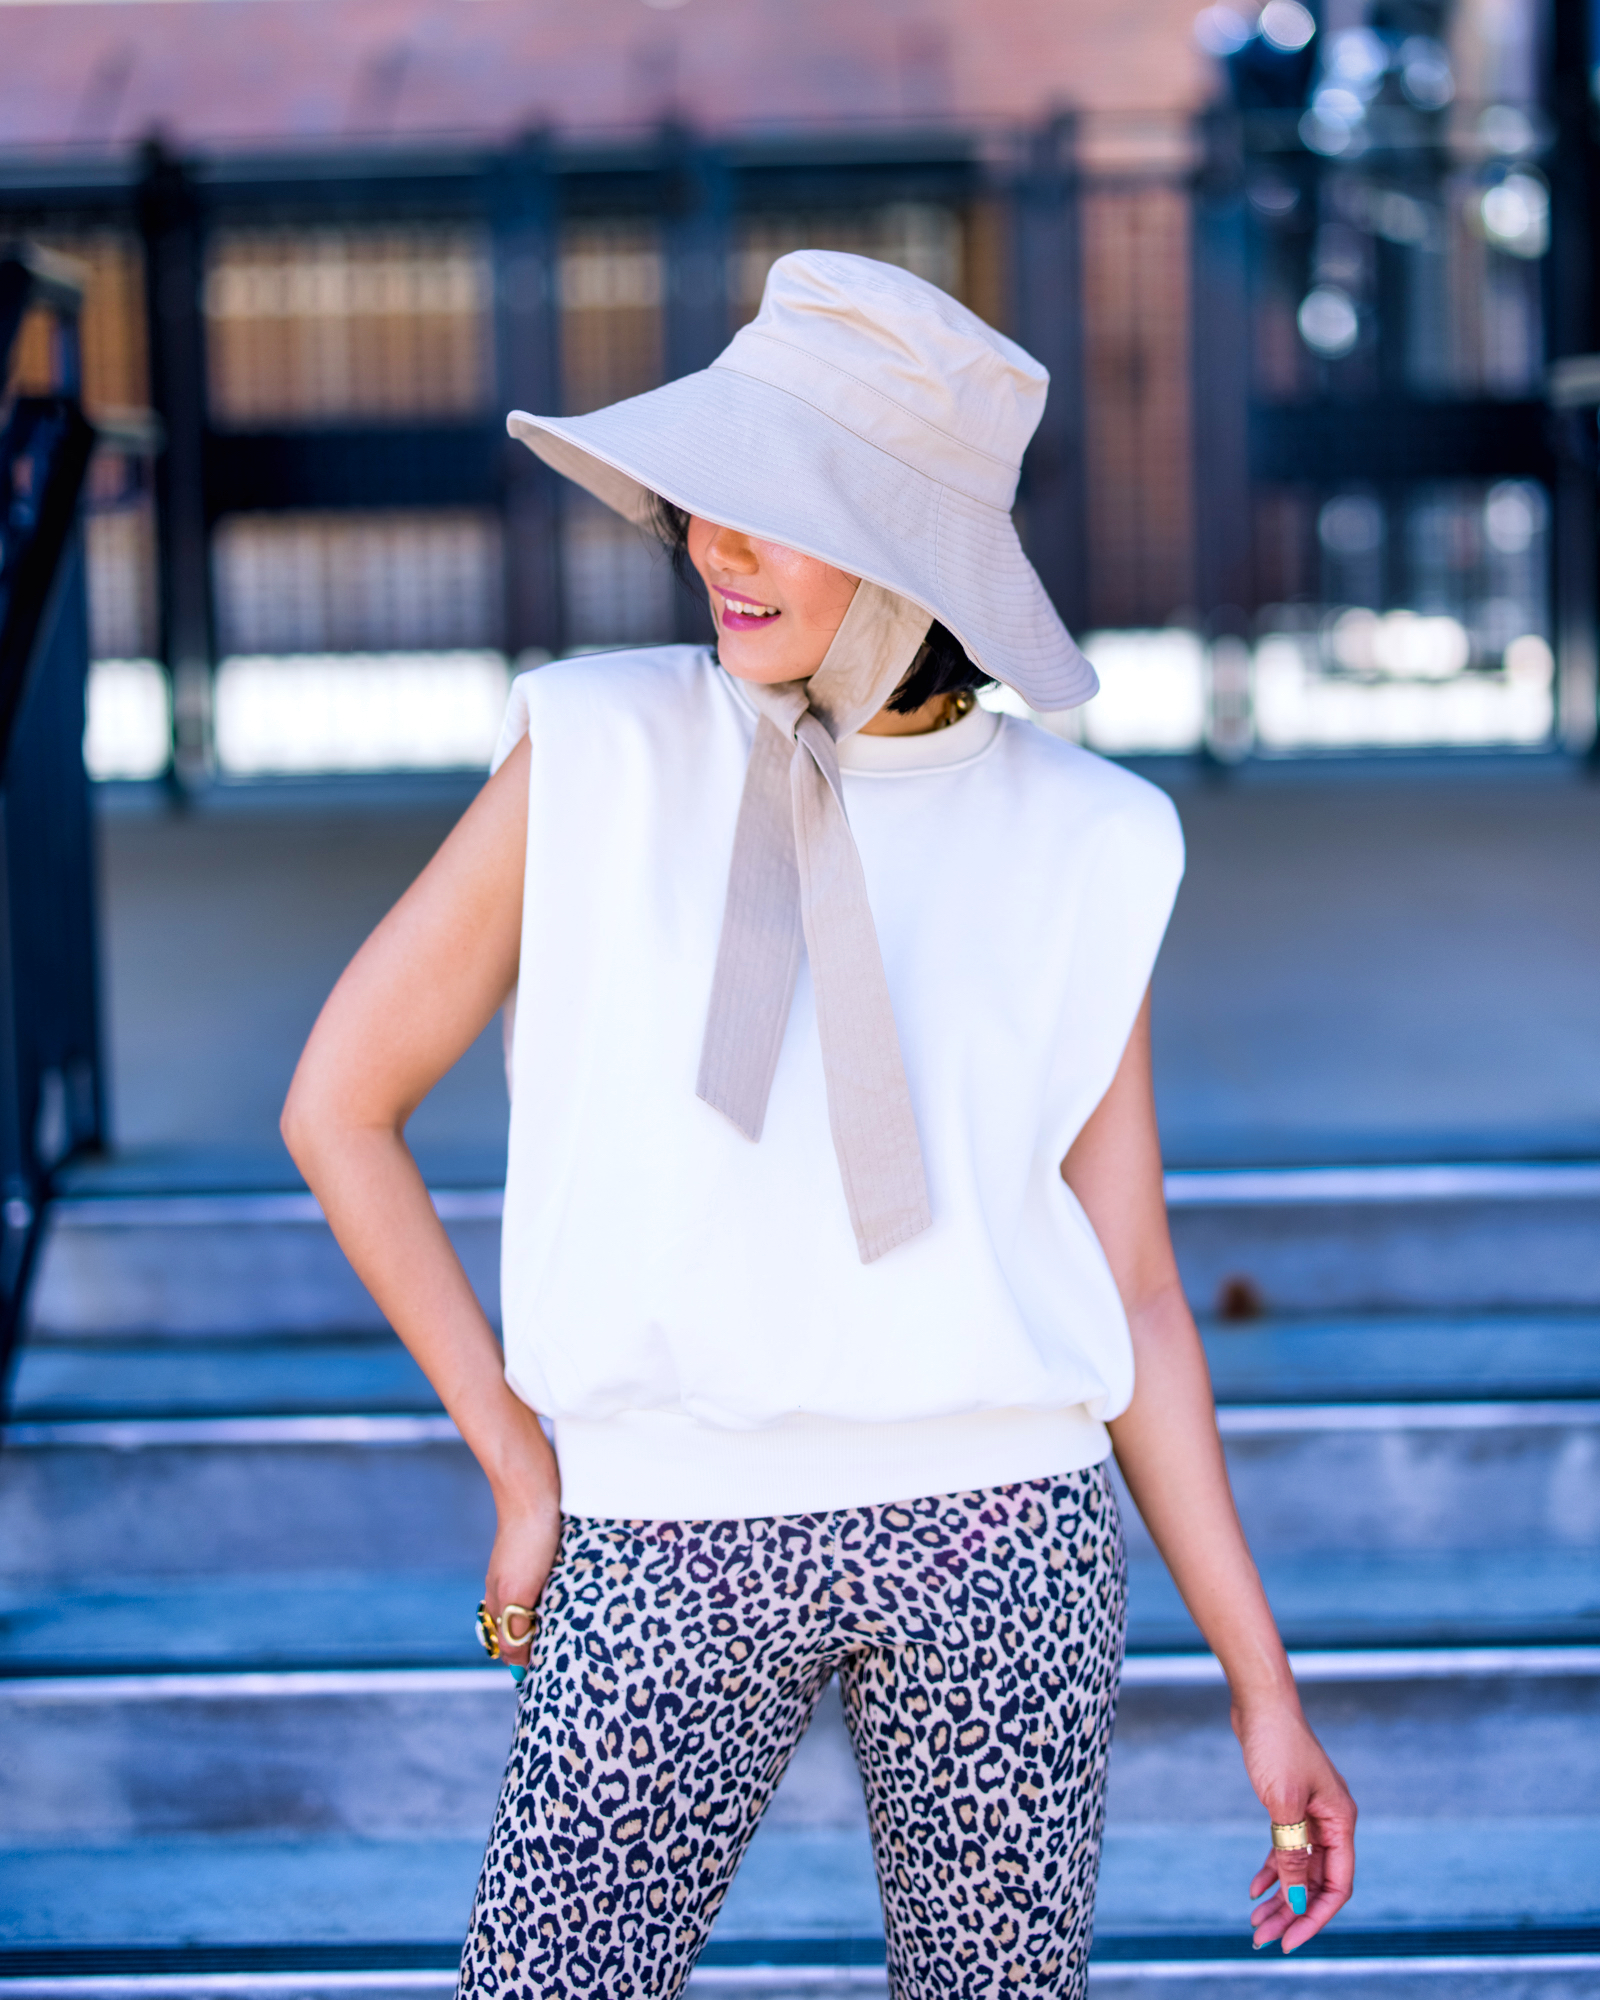 nanphanita jacob is channeling 90s fashion with a shoulder-pad tee with leopard pants and top off with a plain canvas bucket hat by san diego hat company